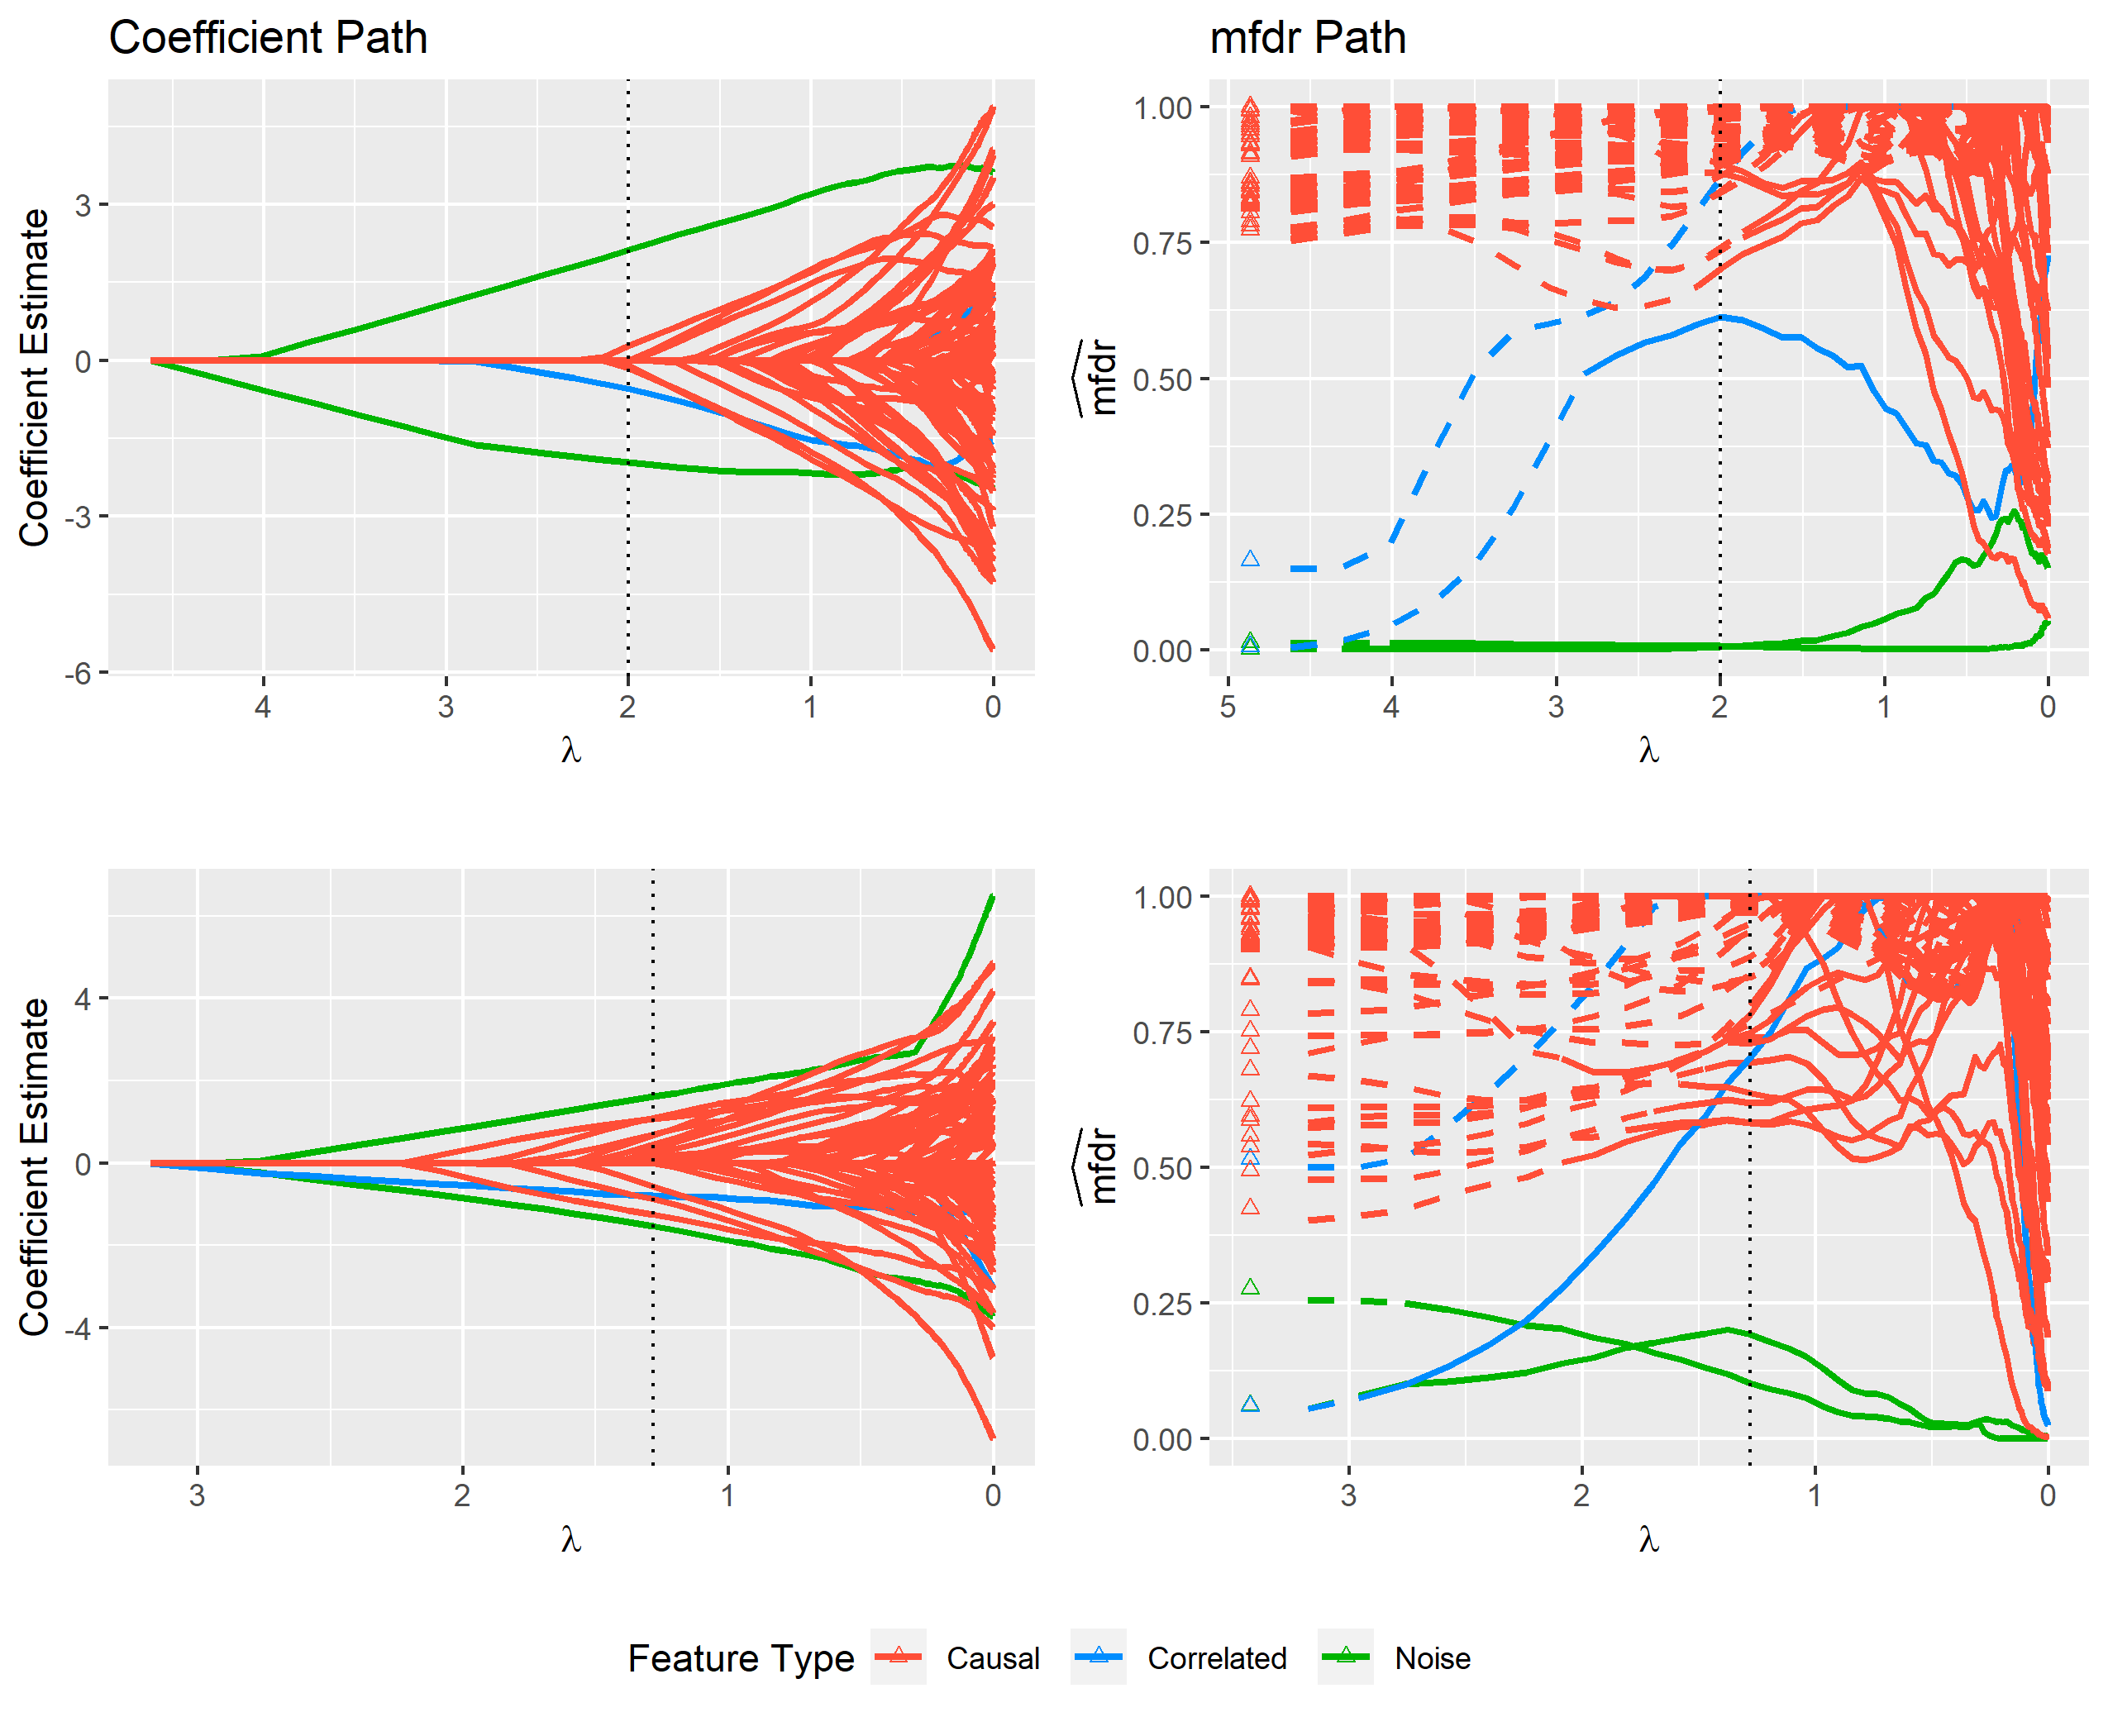 Fig 2: The figure above displays modeling results from a single simulated data set containing various types of variables (features). The left panel shows the standard LASSO coefficient path that is returned by default from most standard software packages such as glmnet. From this path it is difficult to distinguish between important features and noise. The cross-validated model, which is indicated by the dotted vertical line, contains several noise variables that cannot be easily identified using just the coefficient path. The right panel displays each feature’s local marginal false discovery rate (mfdr) along the same sequence of models. This approach is capable of clearly distinguishing between important variables and noise; the method characterizes each of the noise variables in the cross-validated model as having a greater than 50% chance of being a false discovery.